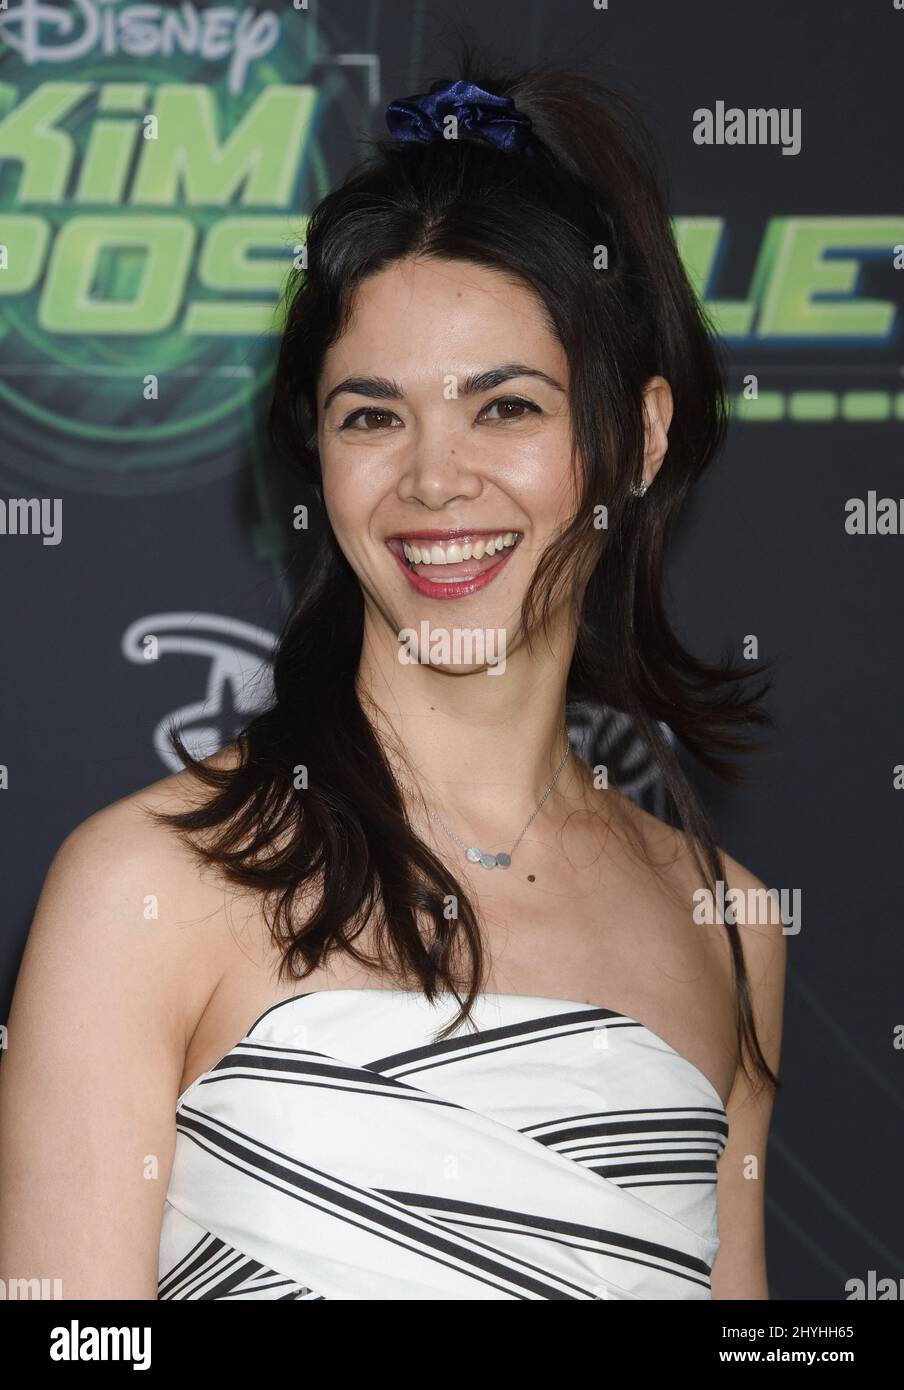 Lilan Bowden at Disney Channel's 'Kim Possible' Premiere held at the Television Academy Stock Photo